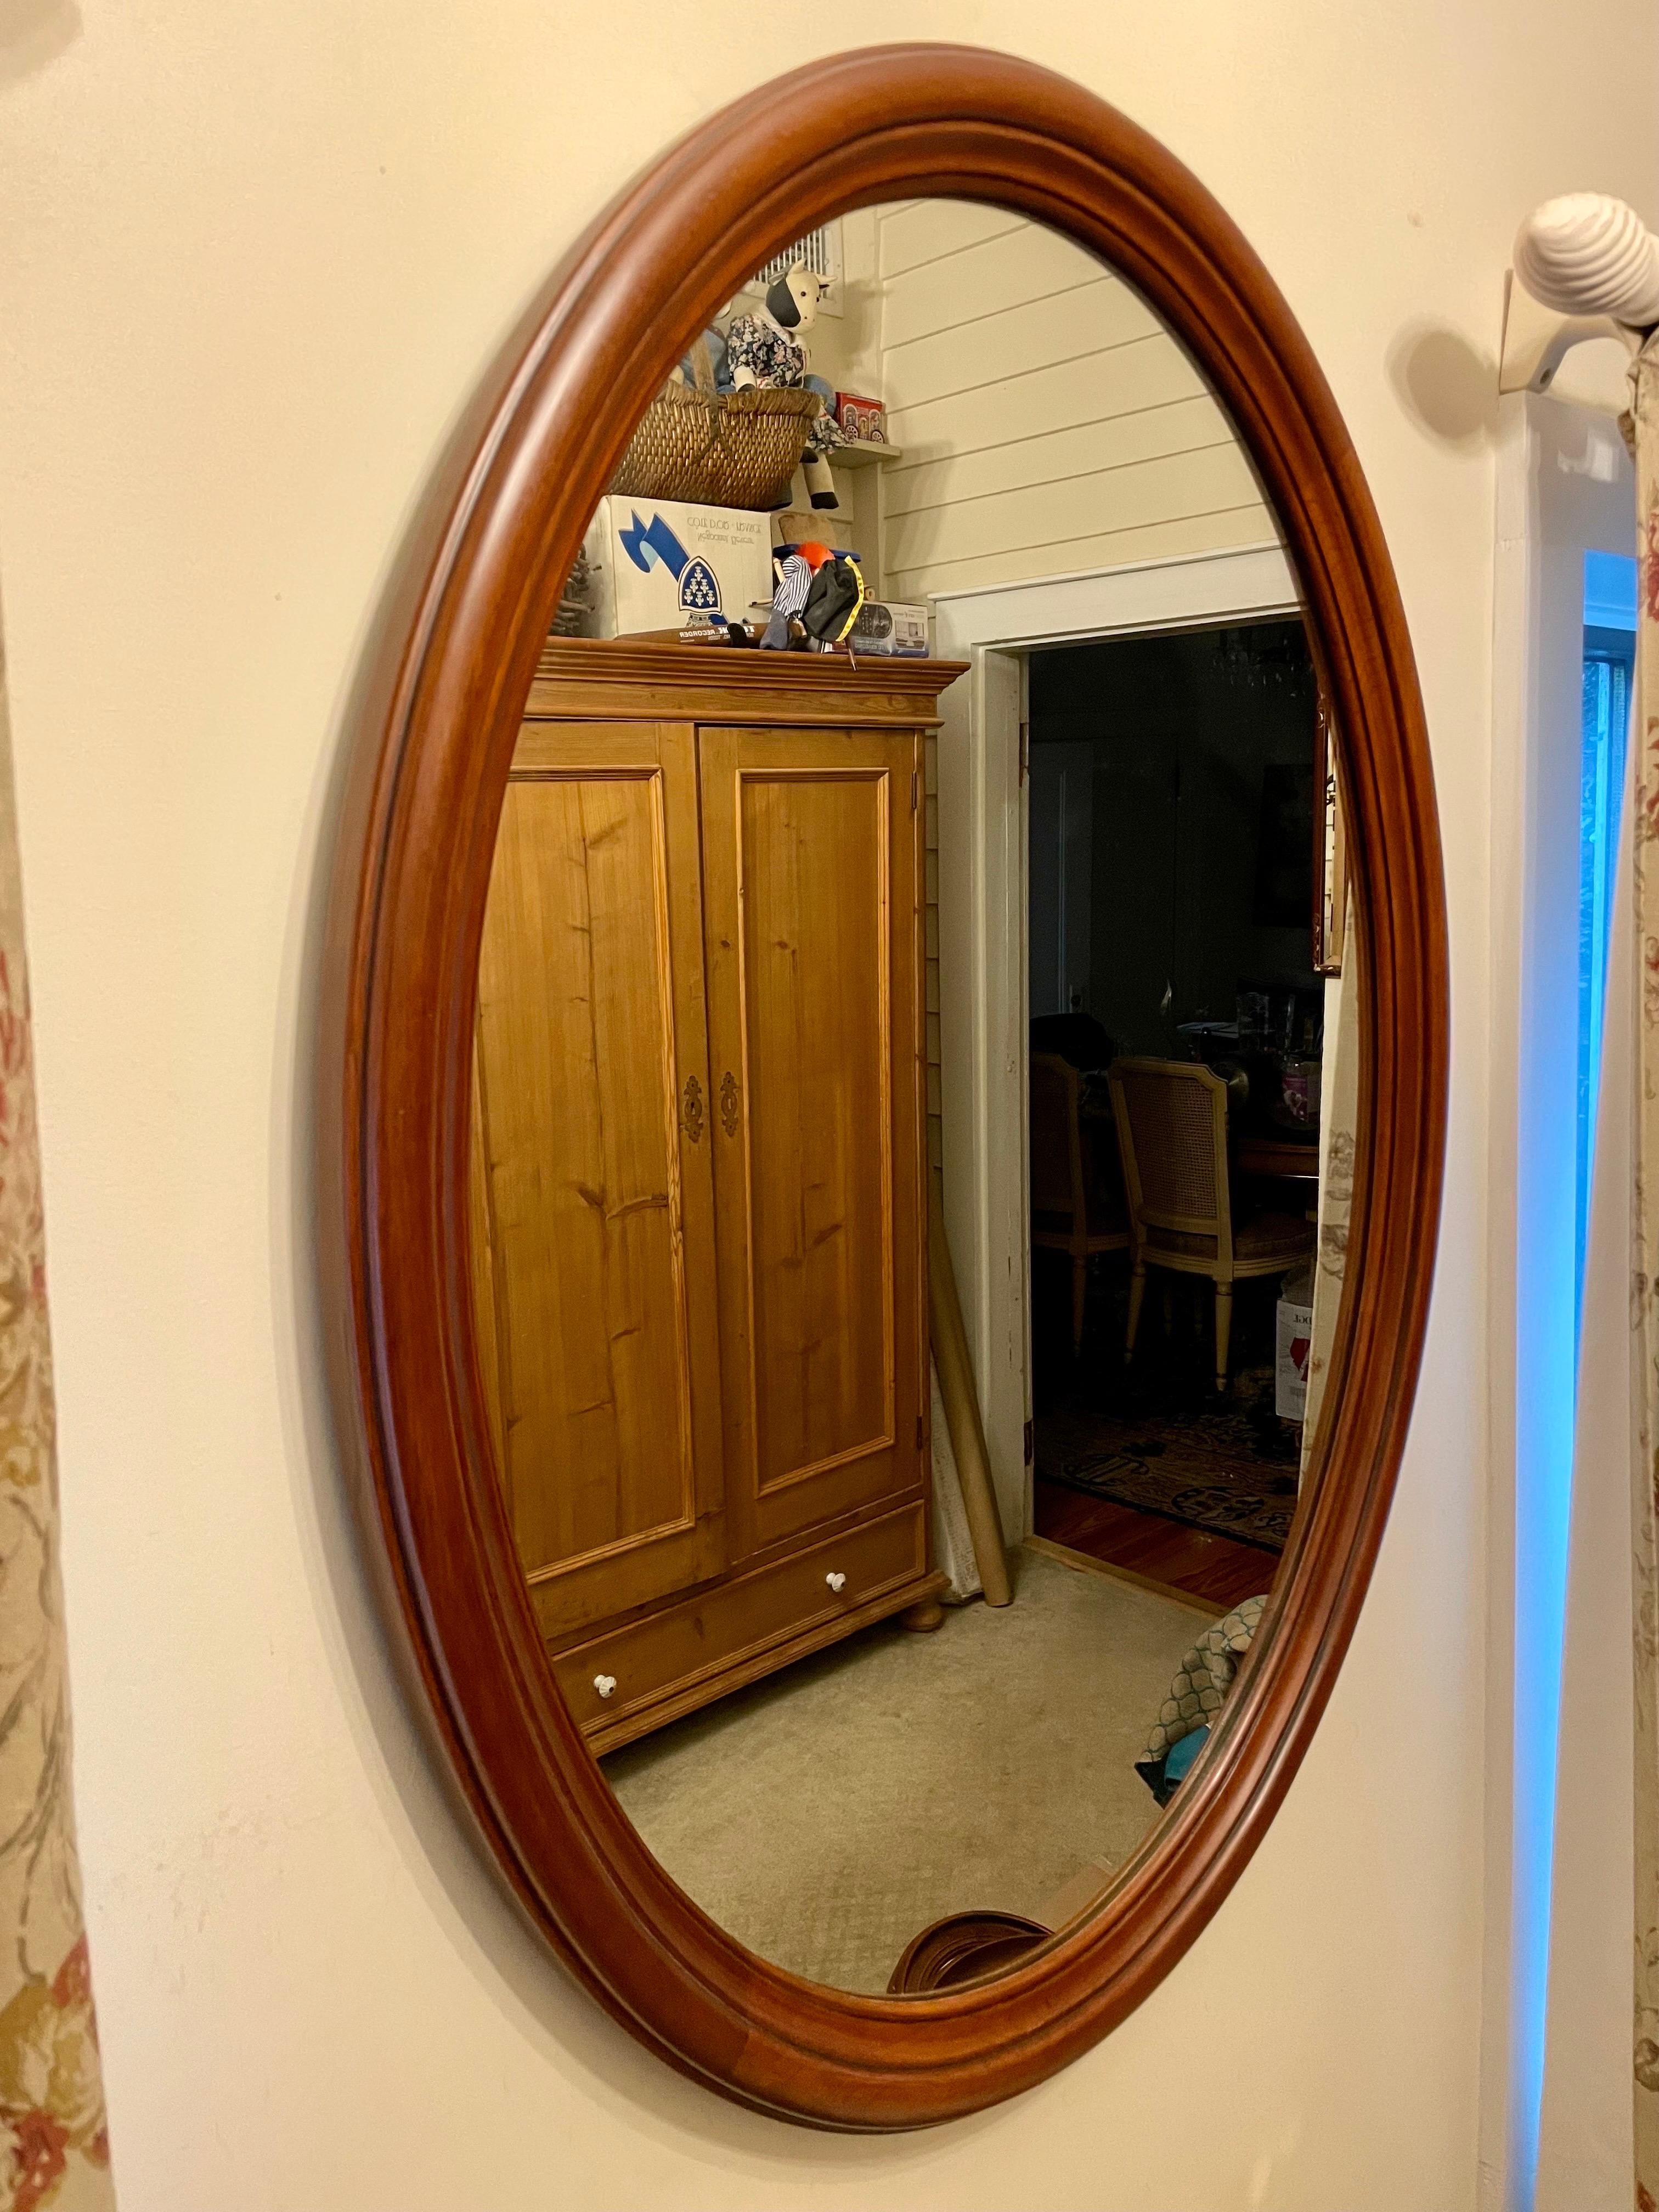 Henkel Harris Wild Black Cherry Oval Wall Mirror with stylized deep ogee profile and inside edge bead.  Wire on back for hanging. Tag on back: Virginia Galleries, The Henkel-Harris Co. Winchester Virginia, Finish No. 24, Style 154, Shop 581-636.